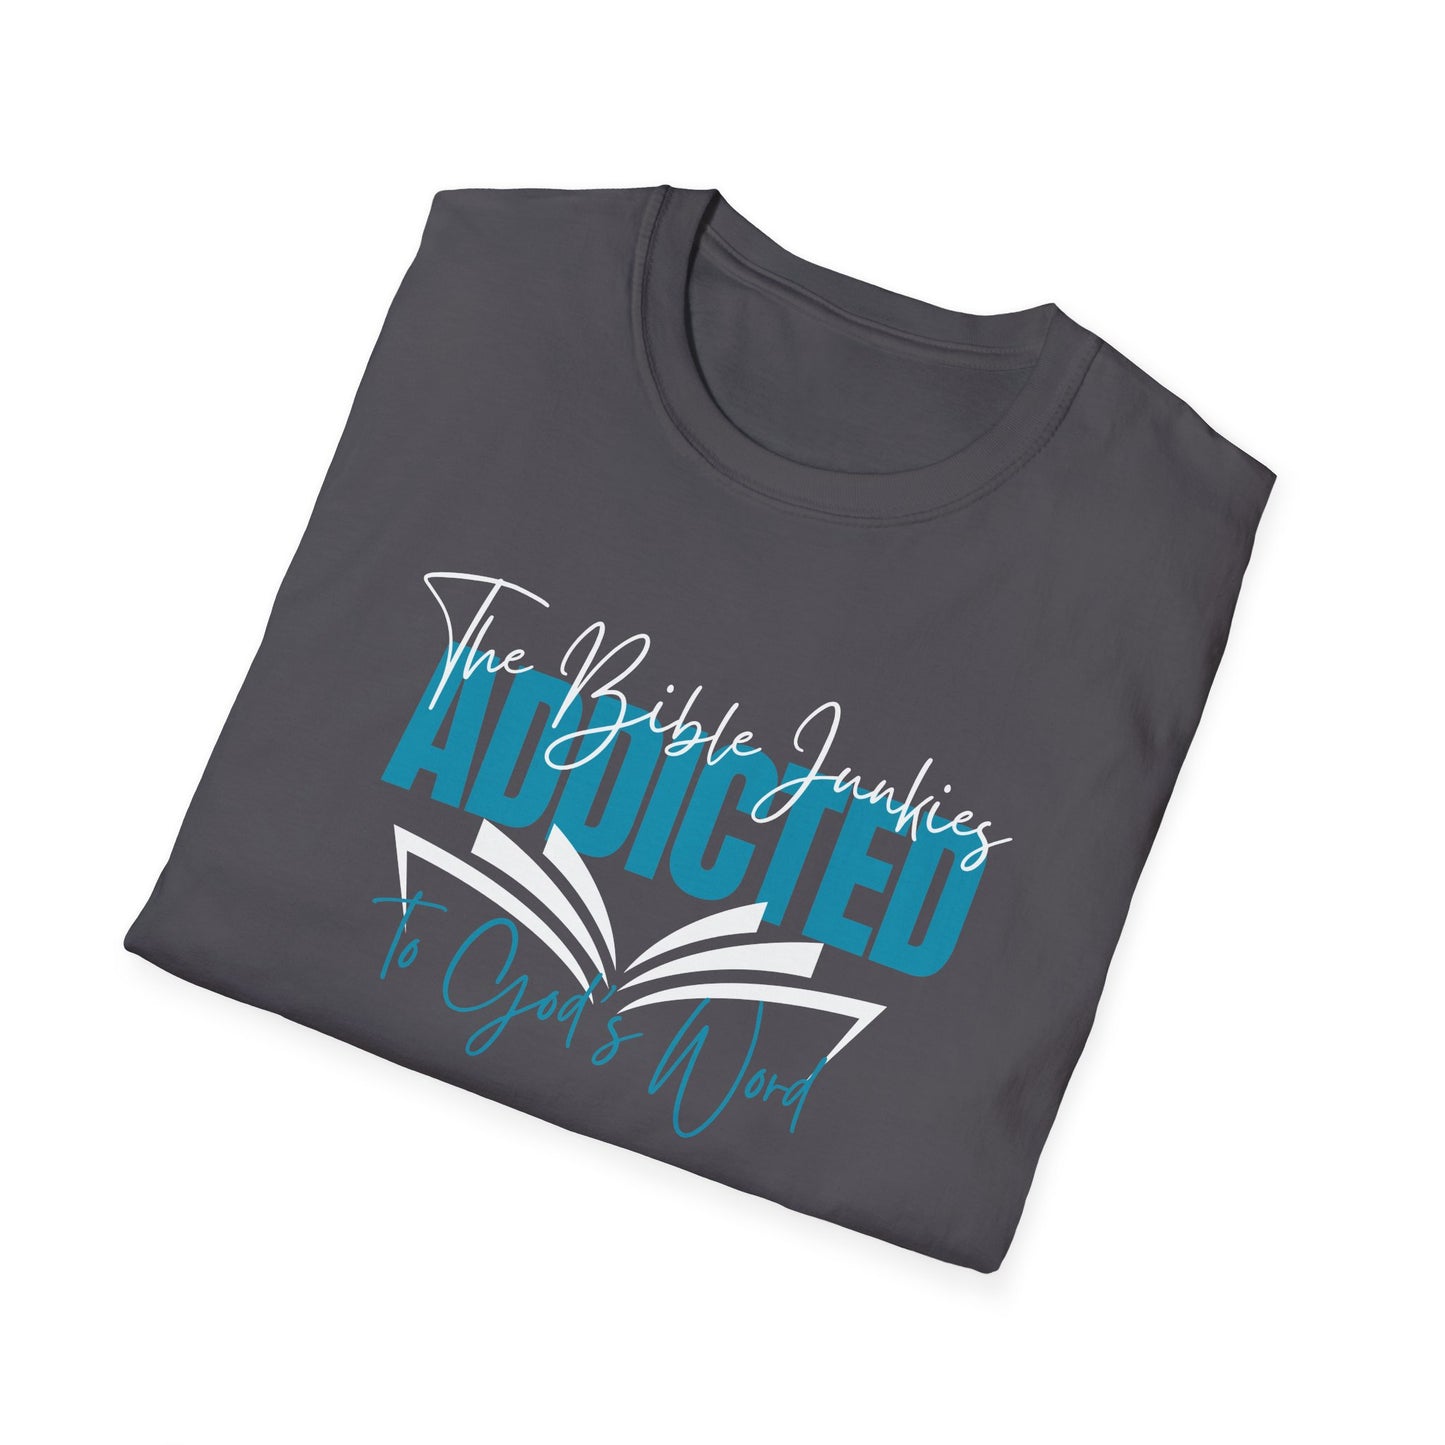 Addicted, Unisex Softstyle T-Shirt - The Bible Junkies®